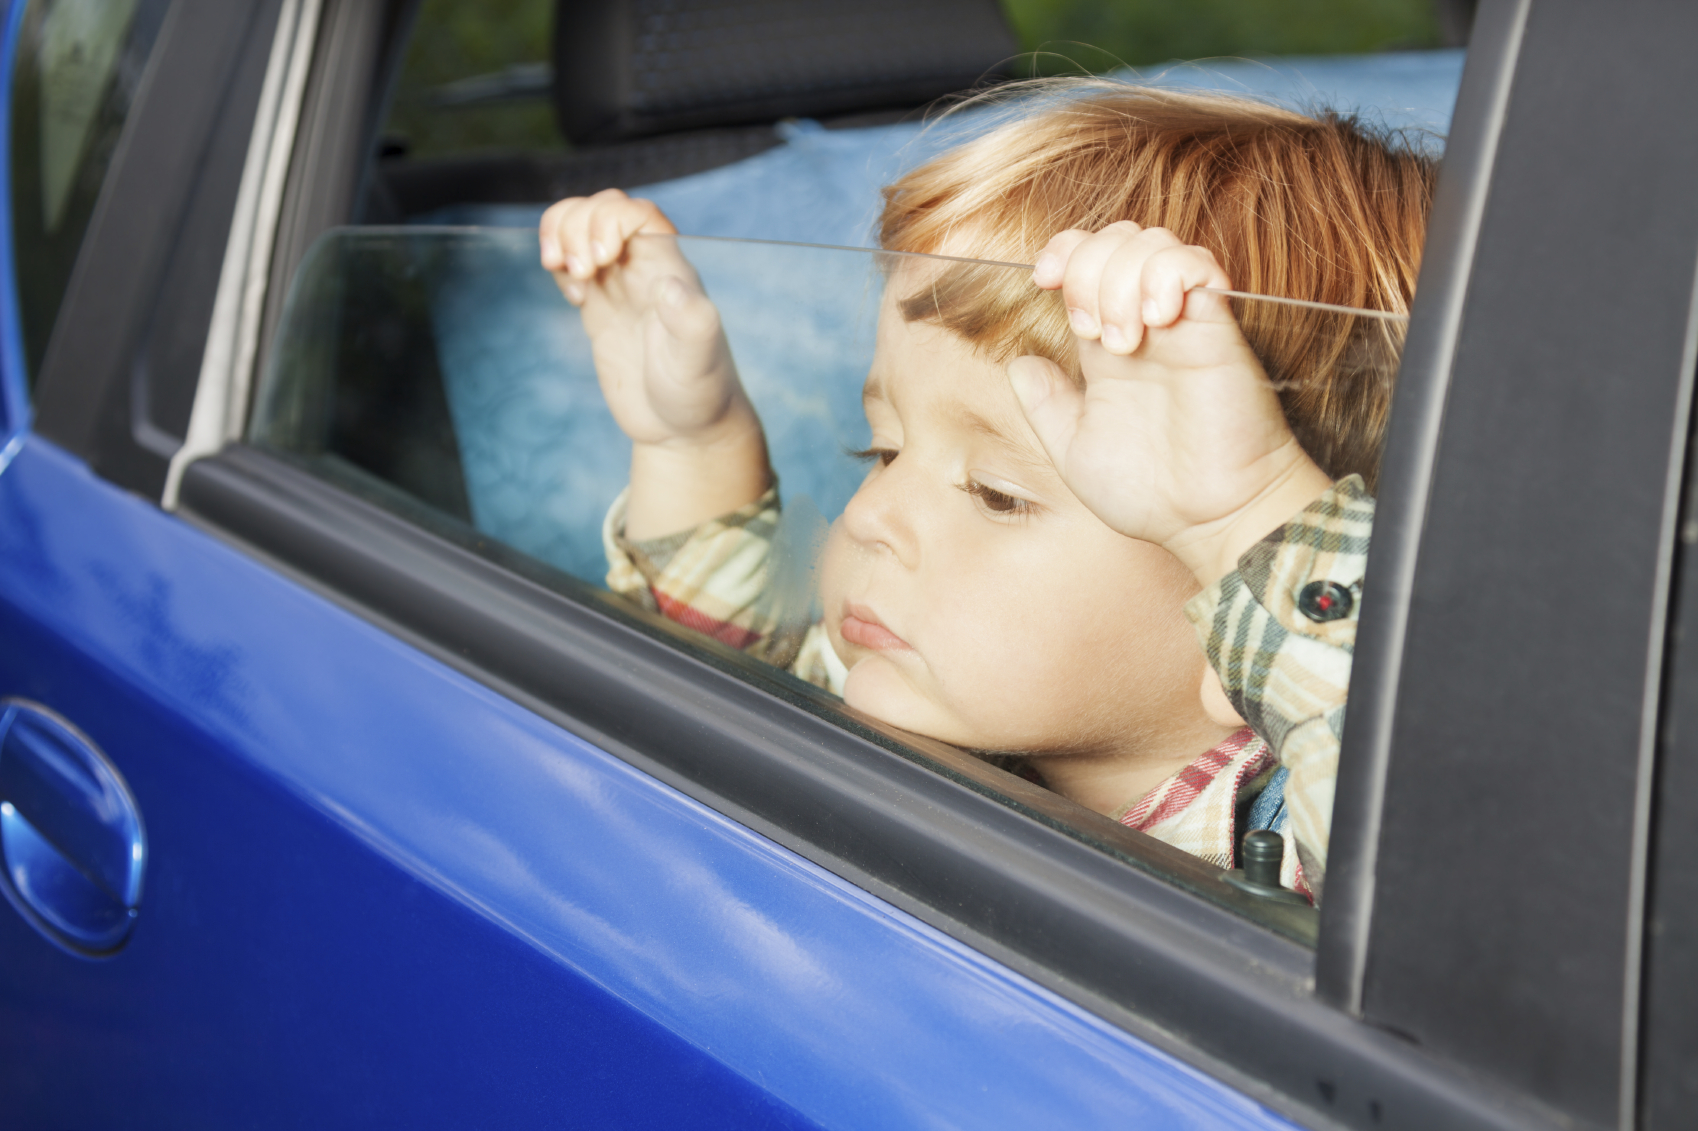 Dwi Penalties With Child Passenger In Dallas Texas